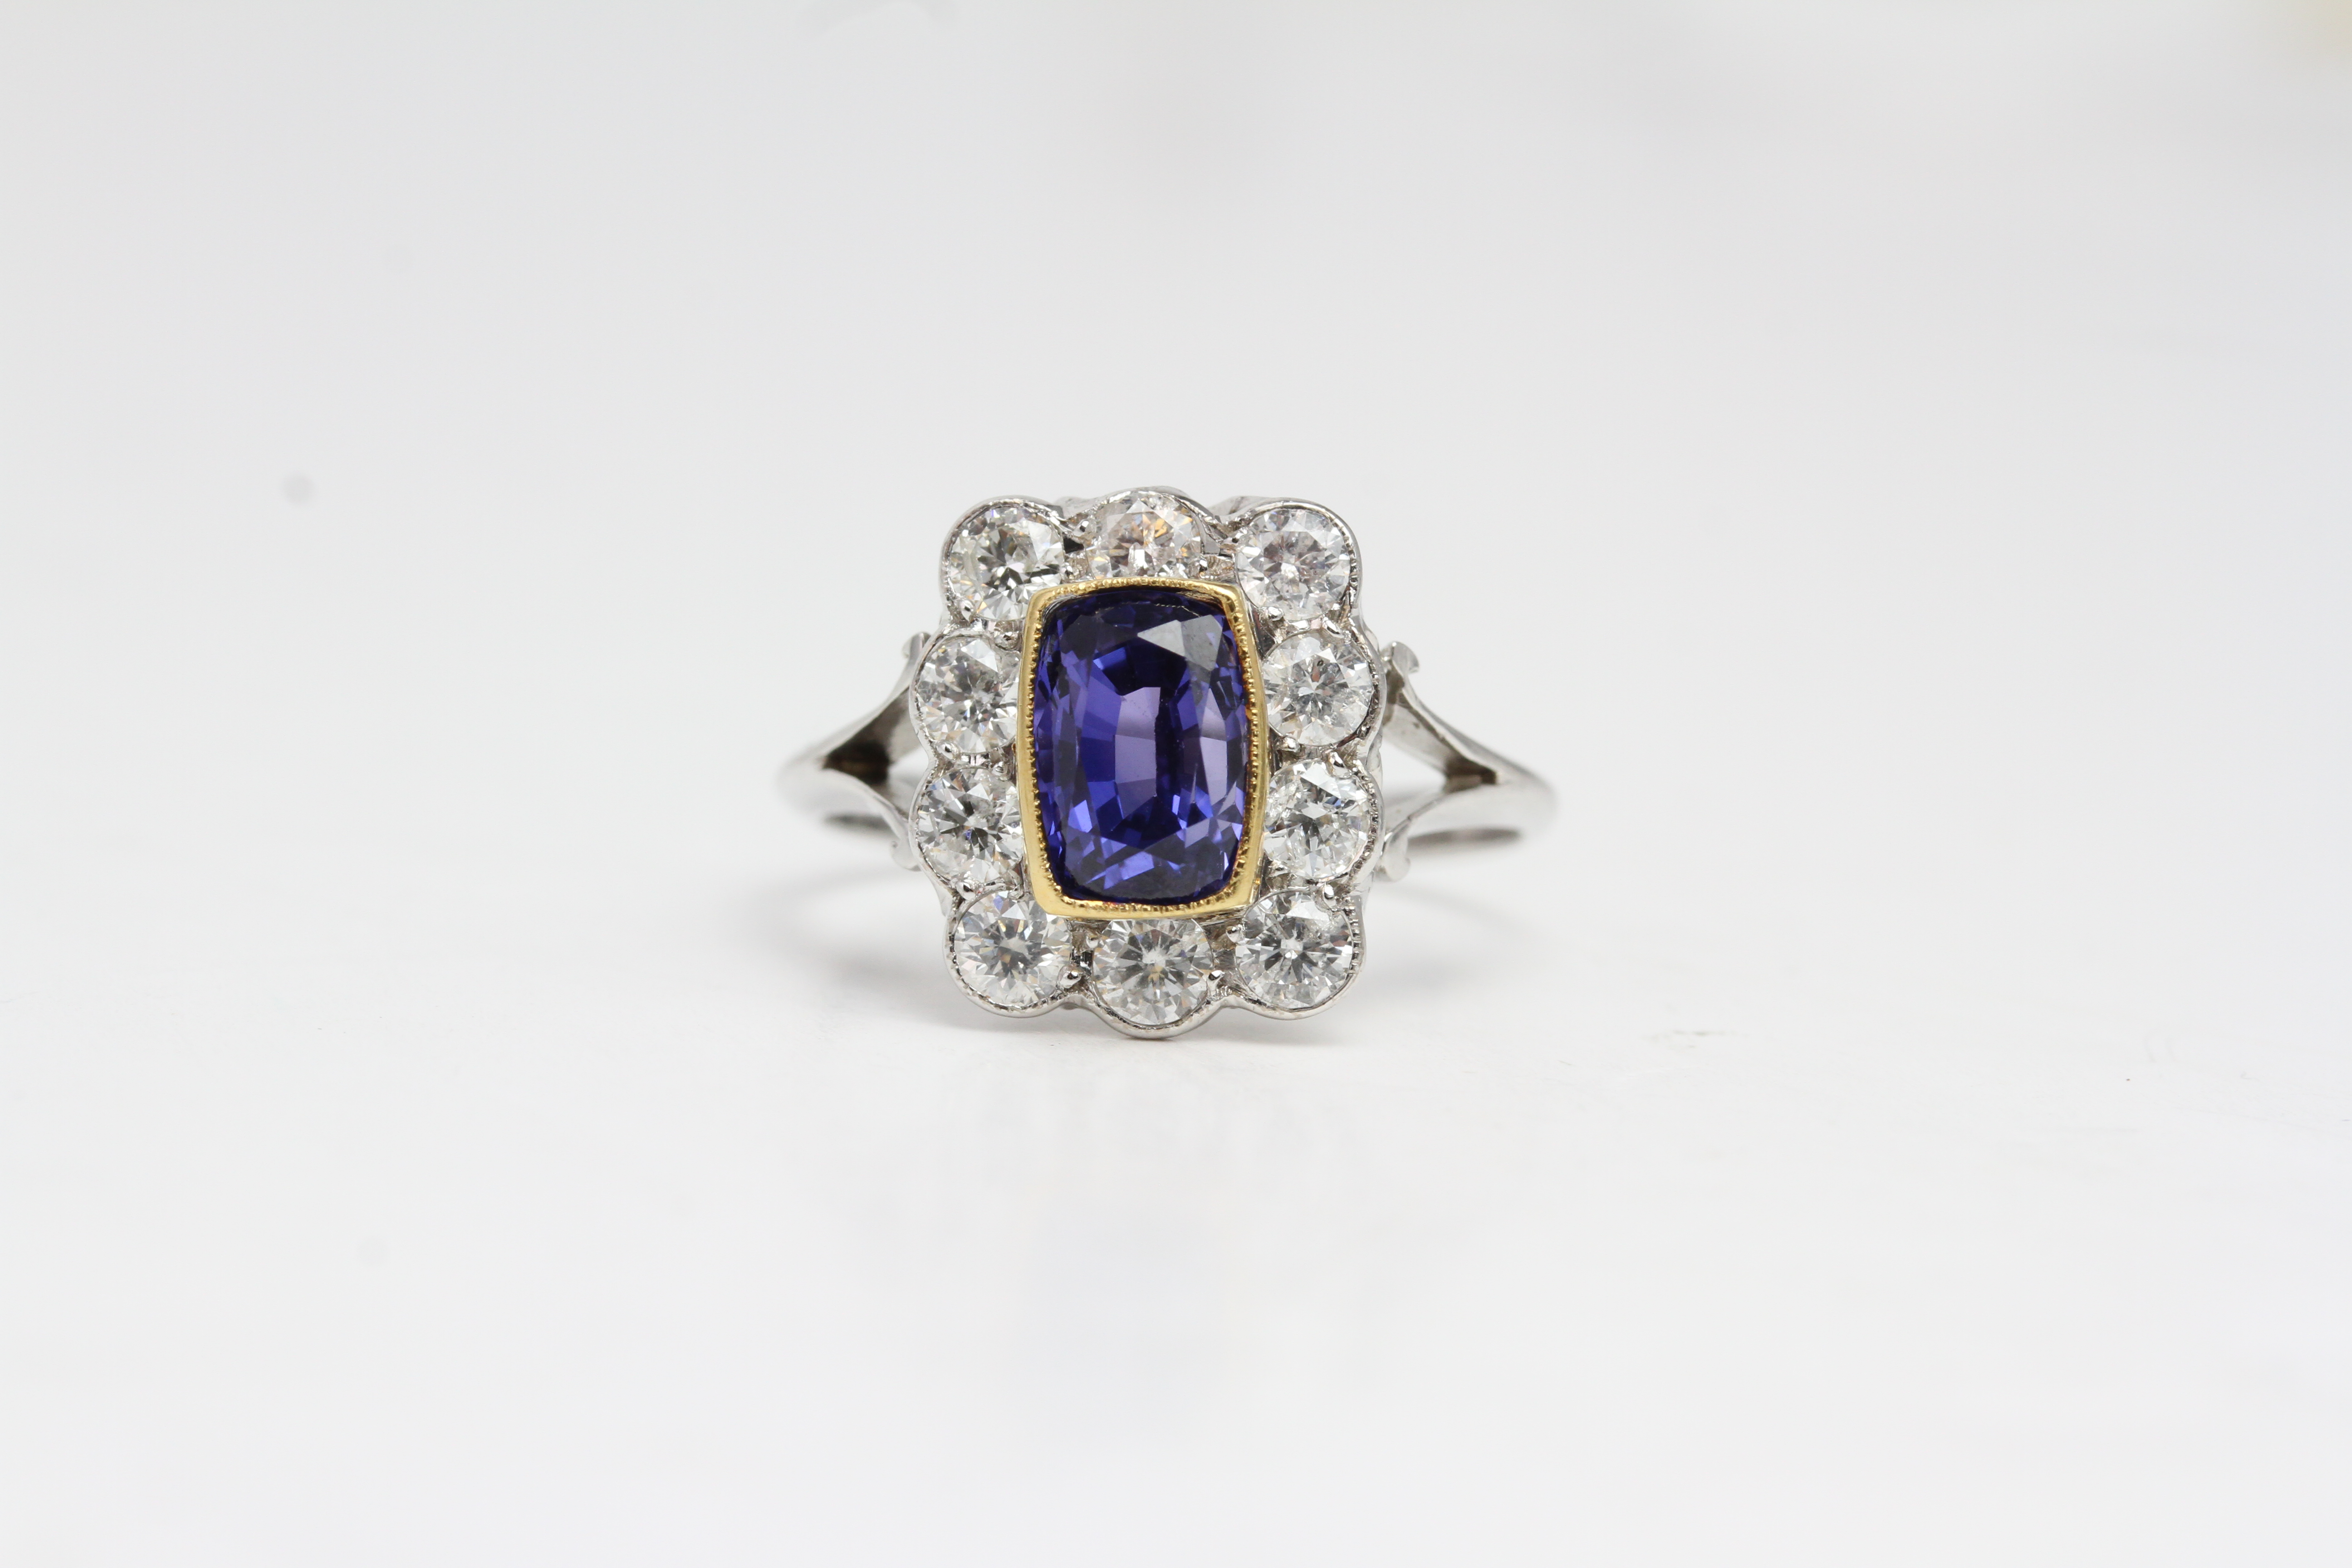 18 white gold sapphire and diamond cluster ring with split shank. The central sapphire is set in a - Image 2 of 3